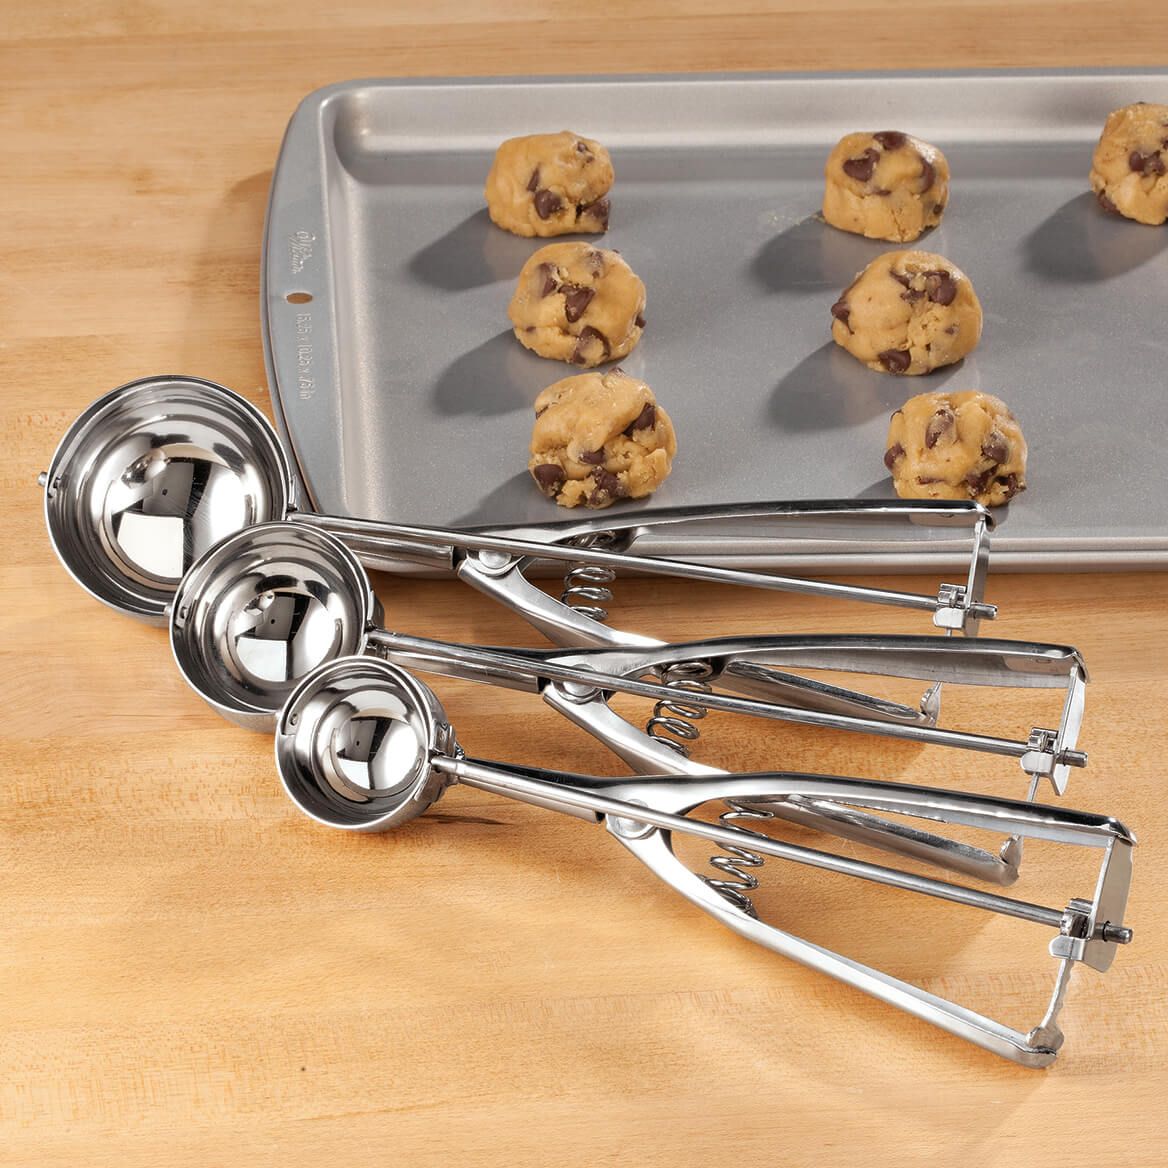 Stainless Steel Cookie Scoops, Set of 3 + '-' + 360438